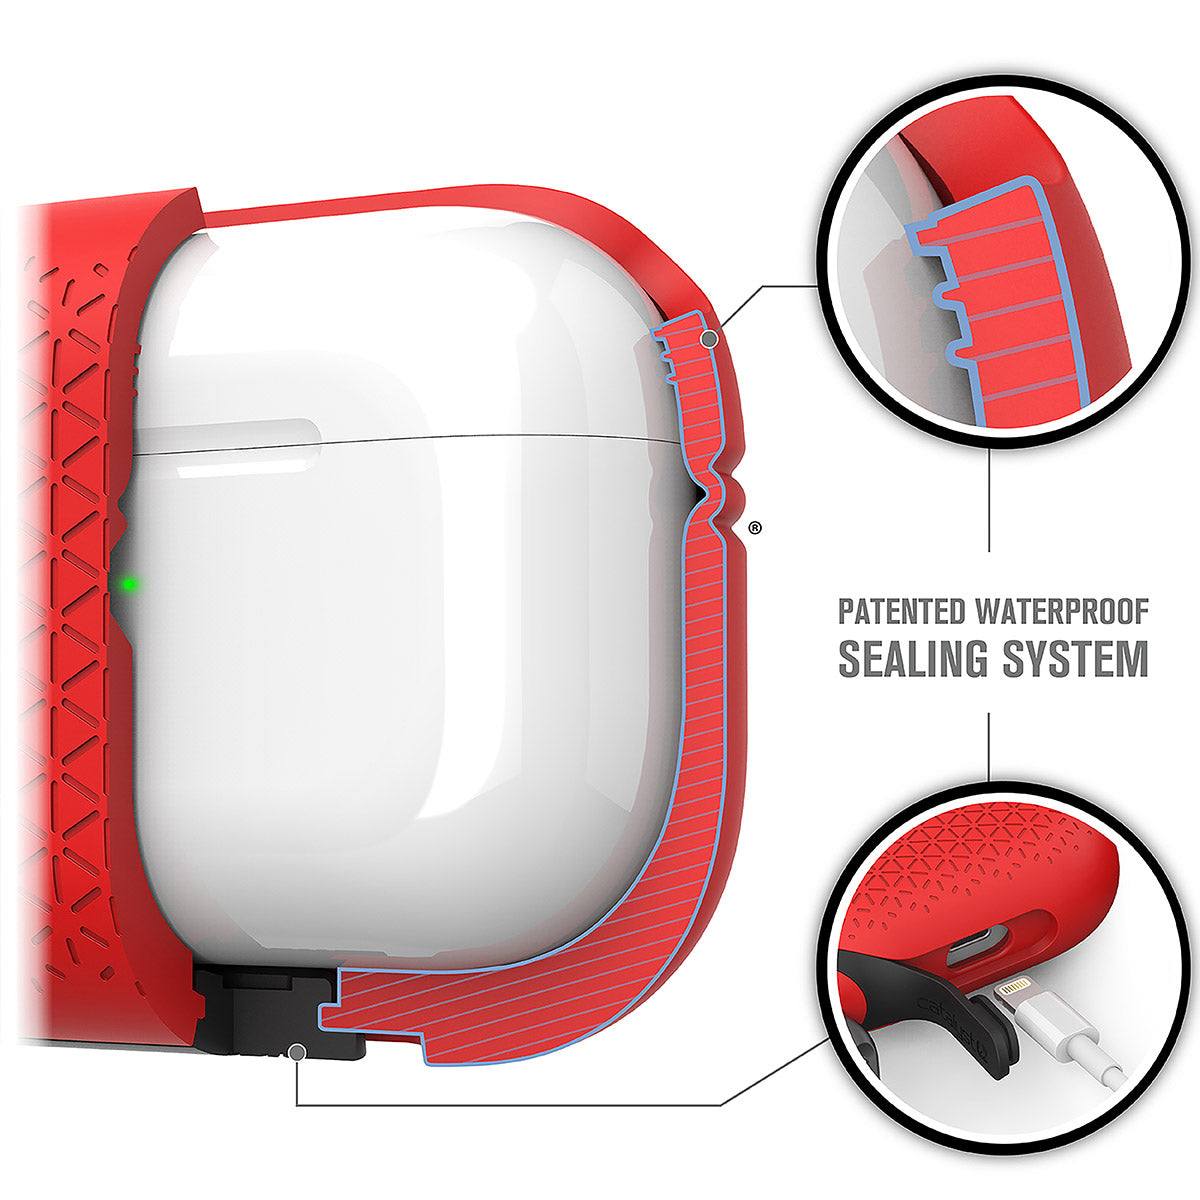 catalyst airpods pro gen 2 1 waterproof case carabiner premium edition flame red showing the patented waterproof sealing system texts reads patented waterproof sealing system